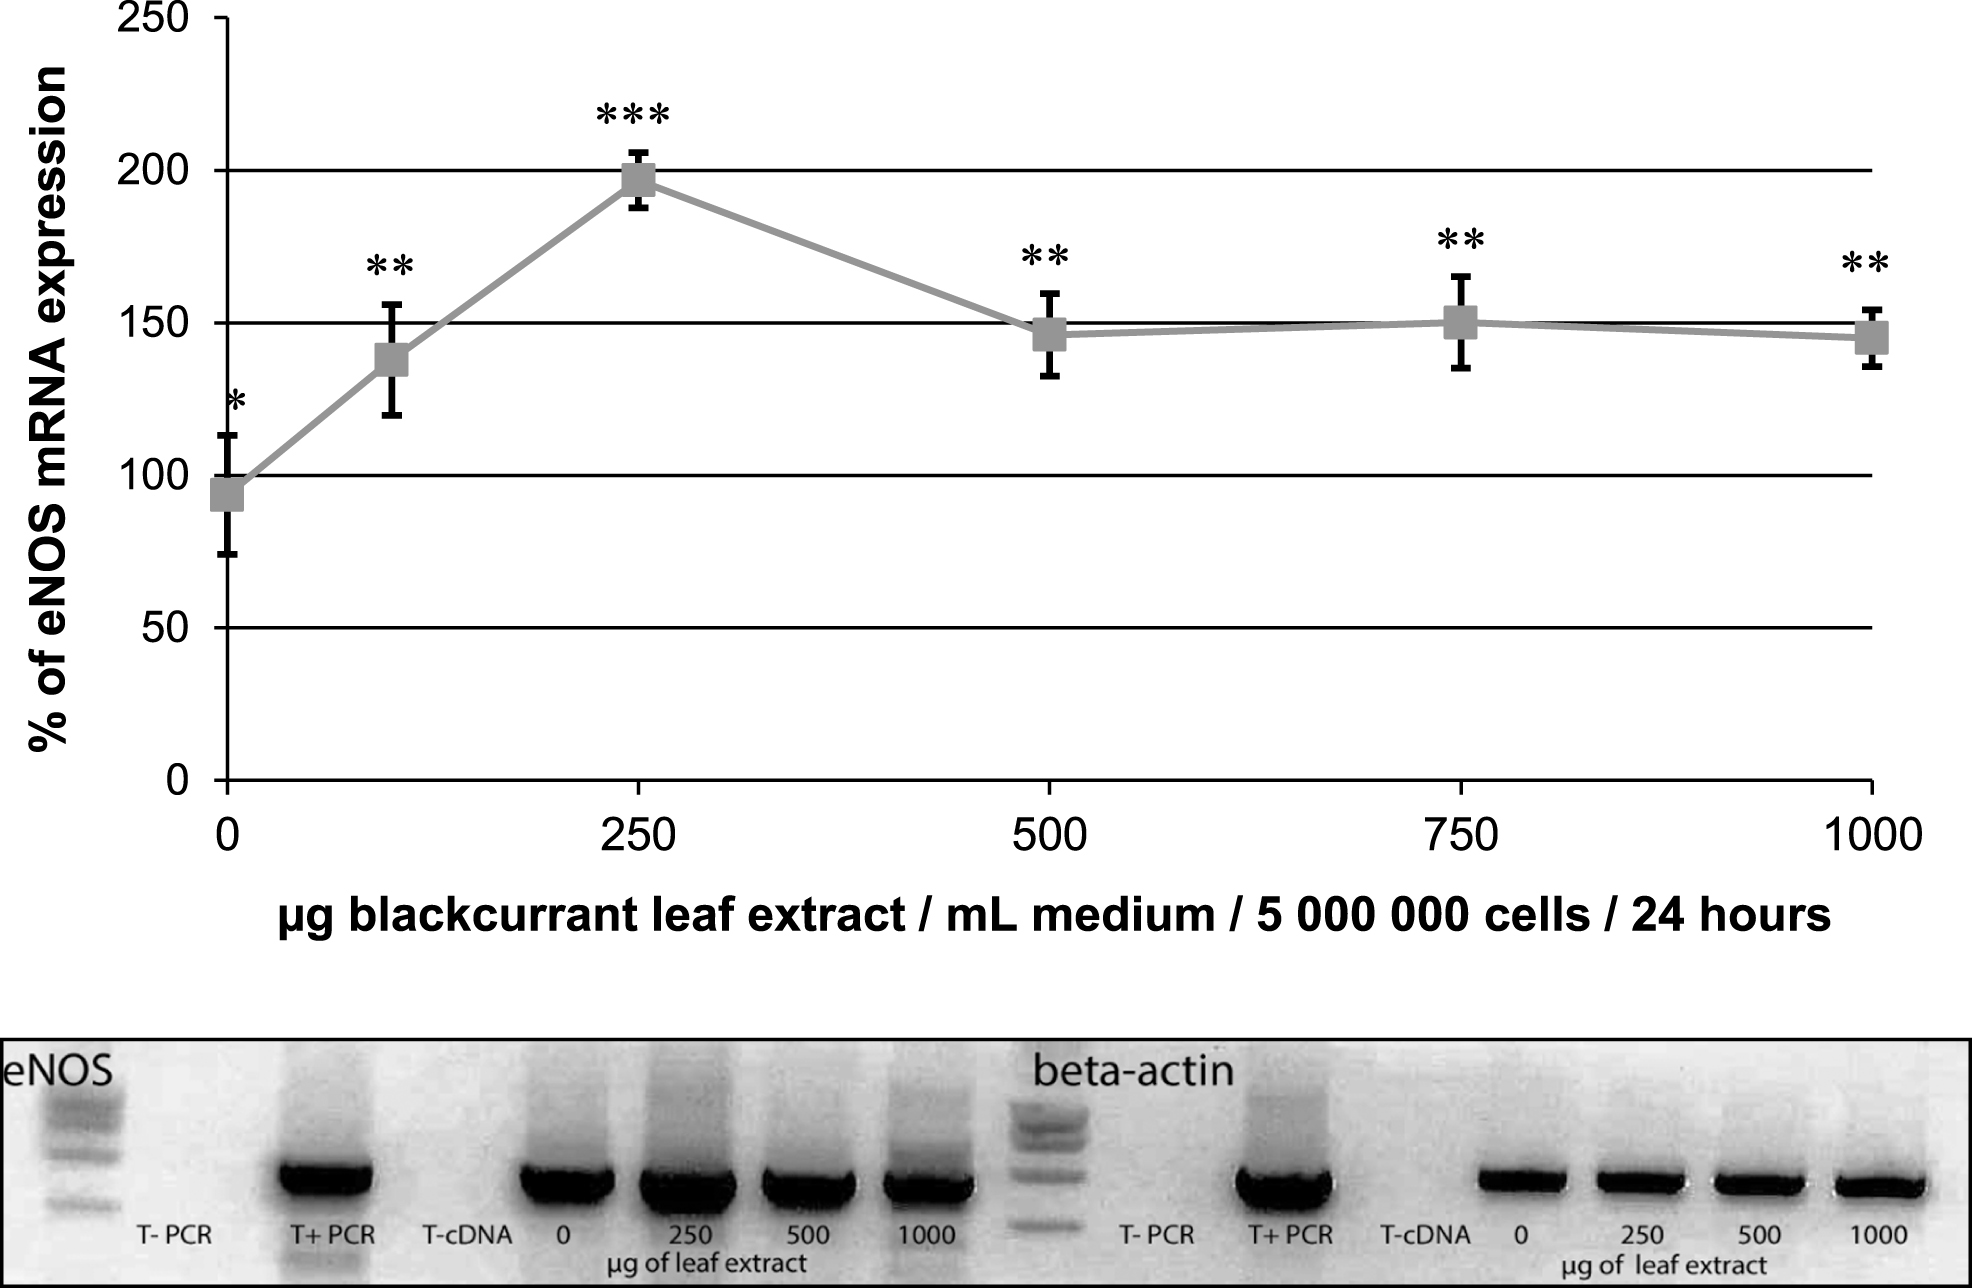 Effect of blackcurrant leaf extracts on eNOS mRNA expression in human endothelial EAHy926 cells (5×106 cells) after a 24 h of incubation period with various concentrations of the extracts (0 to 1 mg/mL). The results are expressed in % of expression and were normalized to β-actin mRNA expression taken as 100%. Data are shown as means±SD (n = 3). Significant differences at p < 0.05 are indicated by different numbers of *. Representative agarose gel showing the effect of 0, 250, 500 and 1000μg/mL of leaf extract on the expression level of eNOS and β-actin.